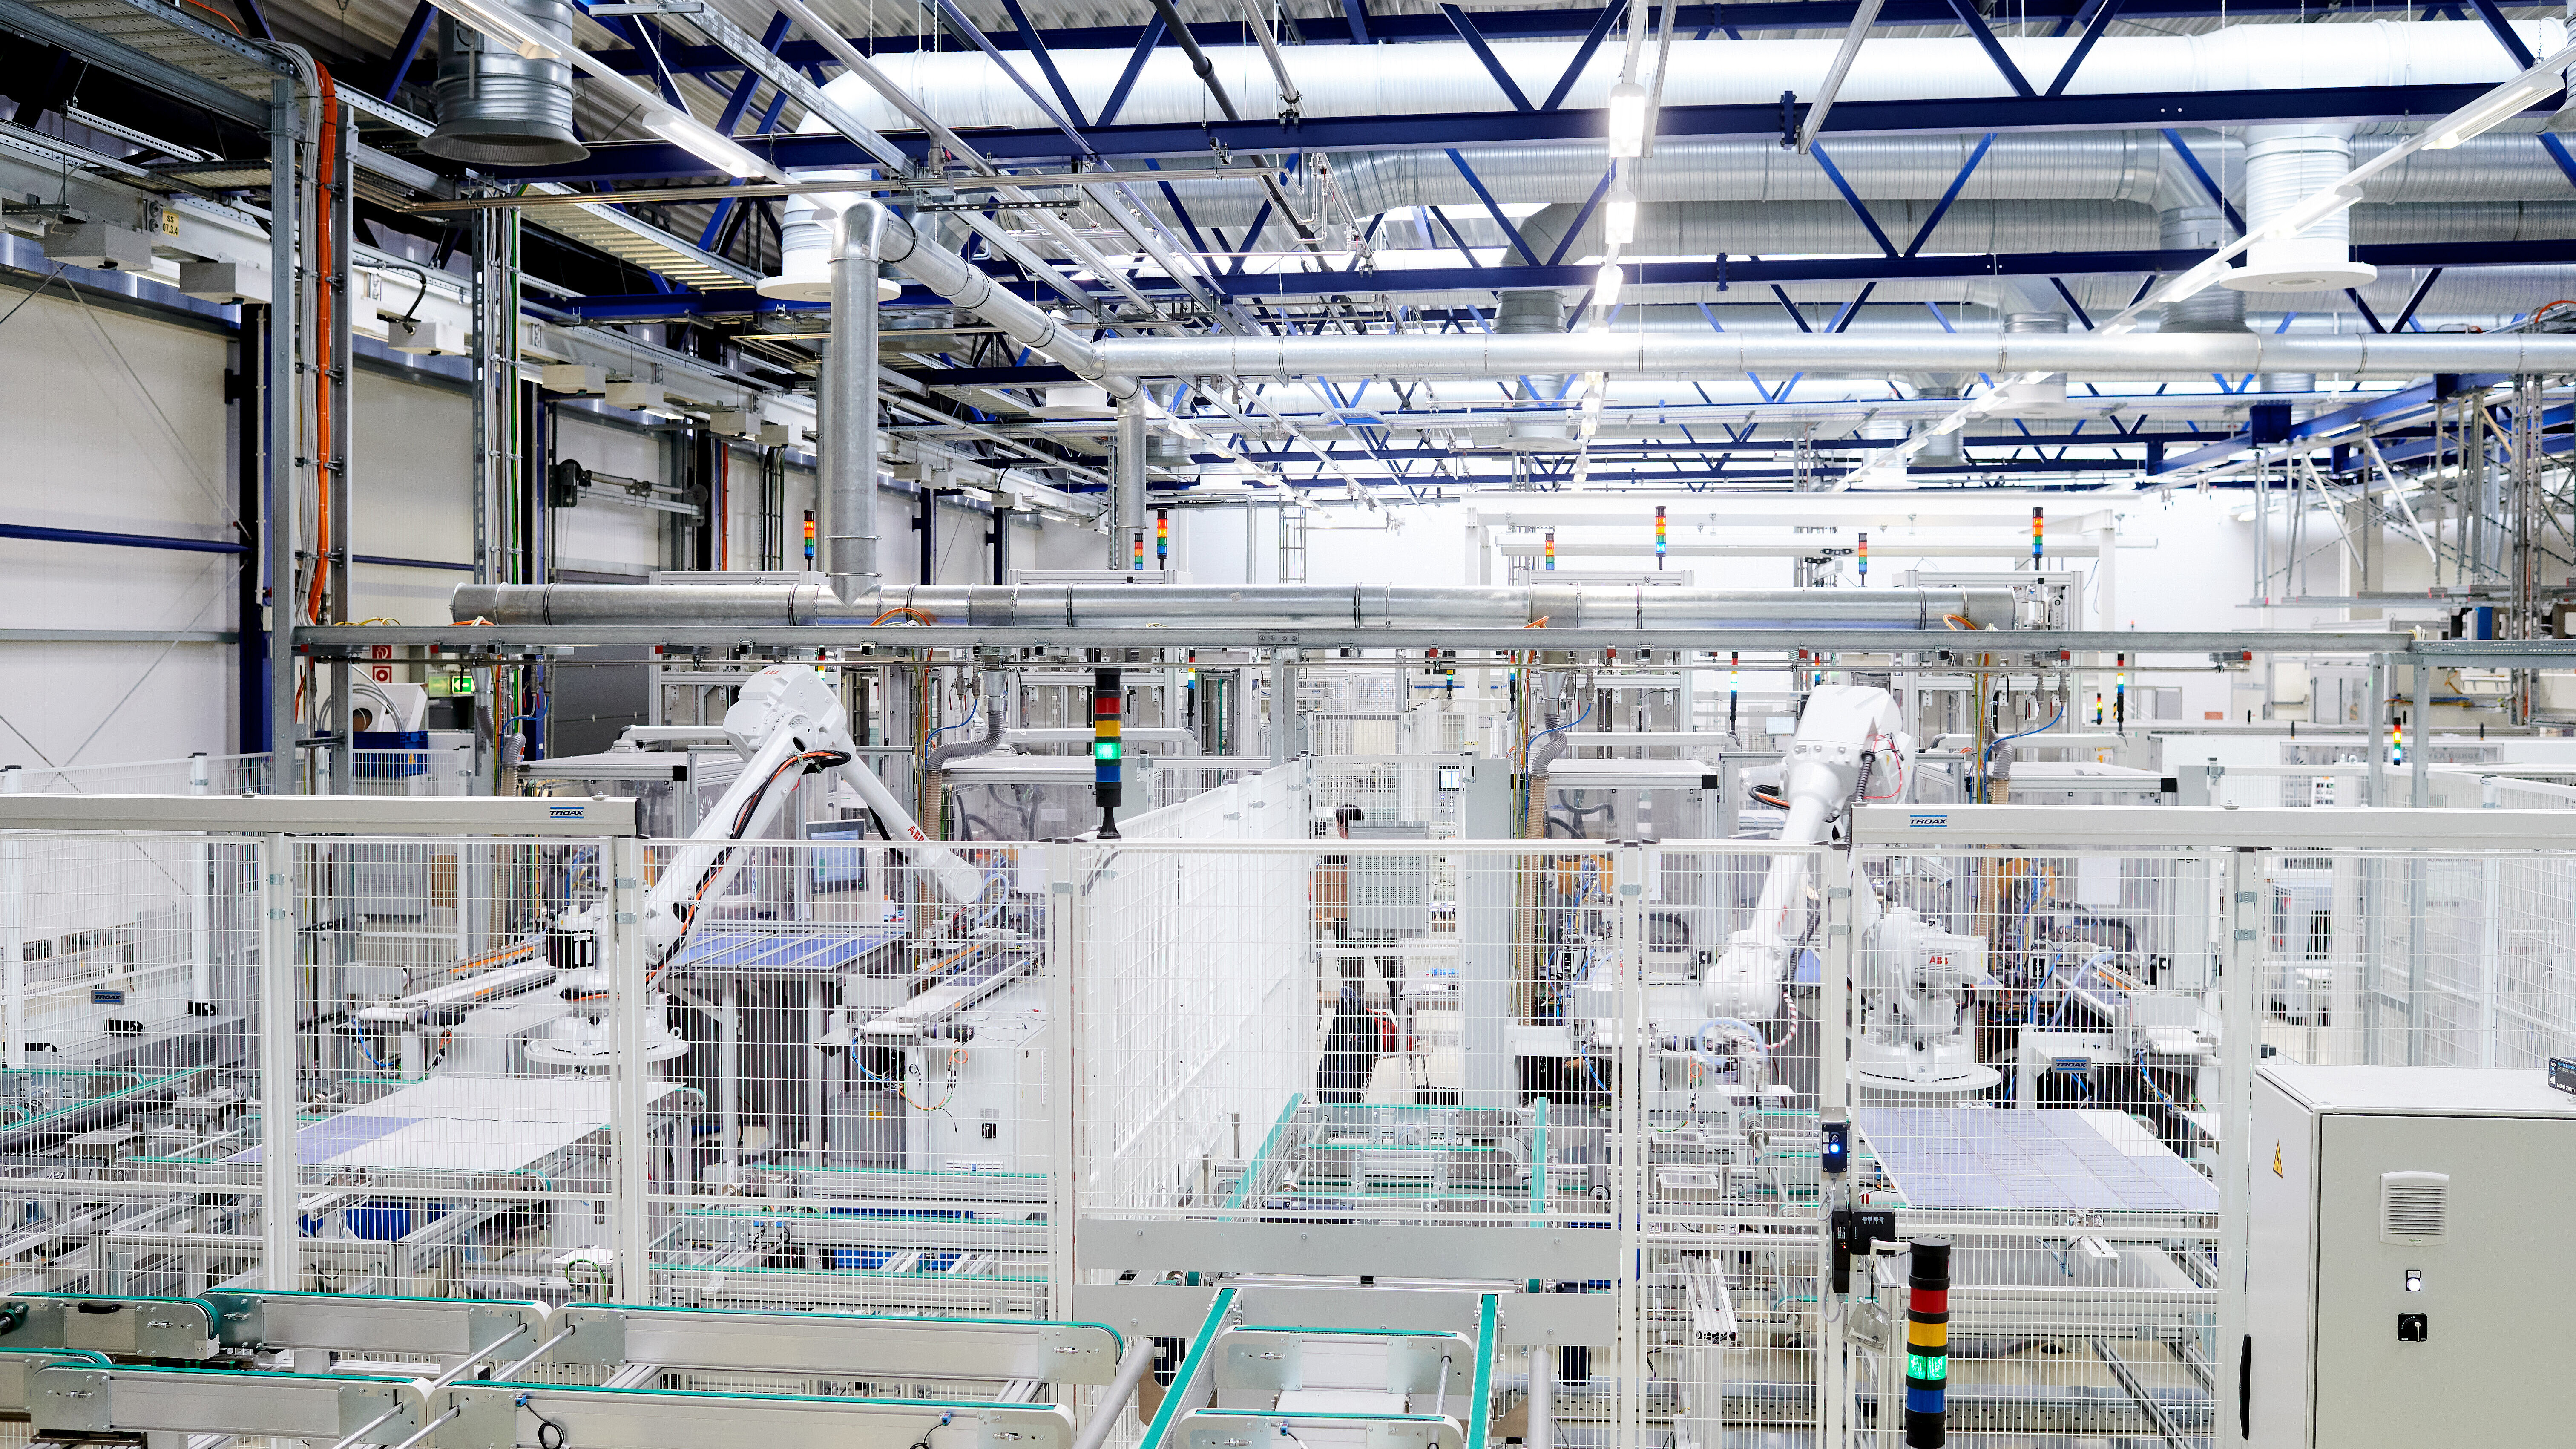 Overview of module production in Freiberg